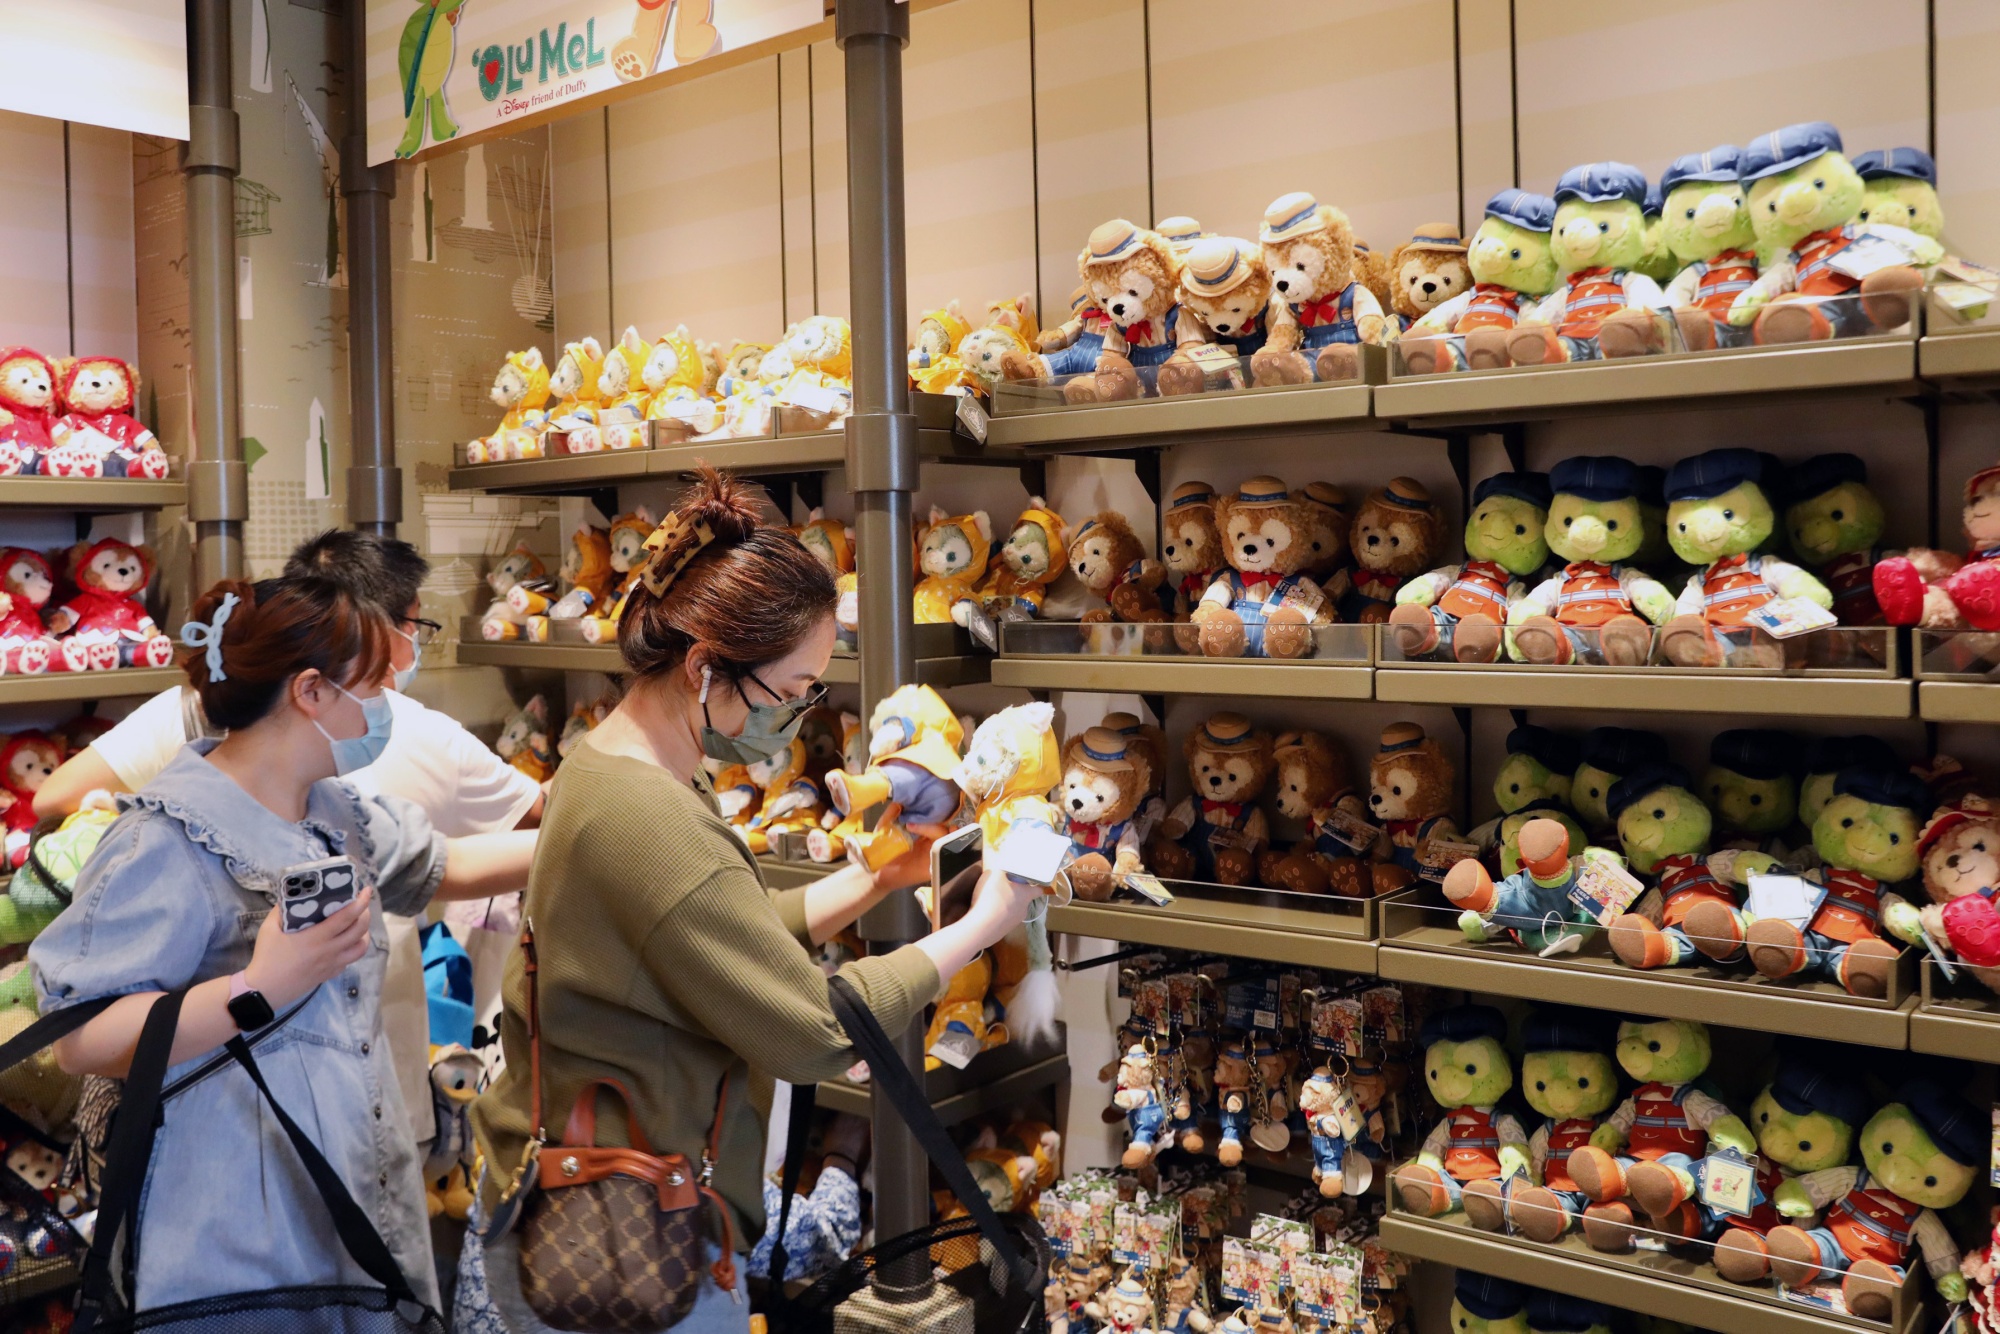 The best-selling top 10 plush toys in the USA